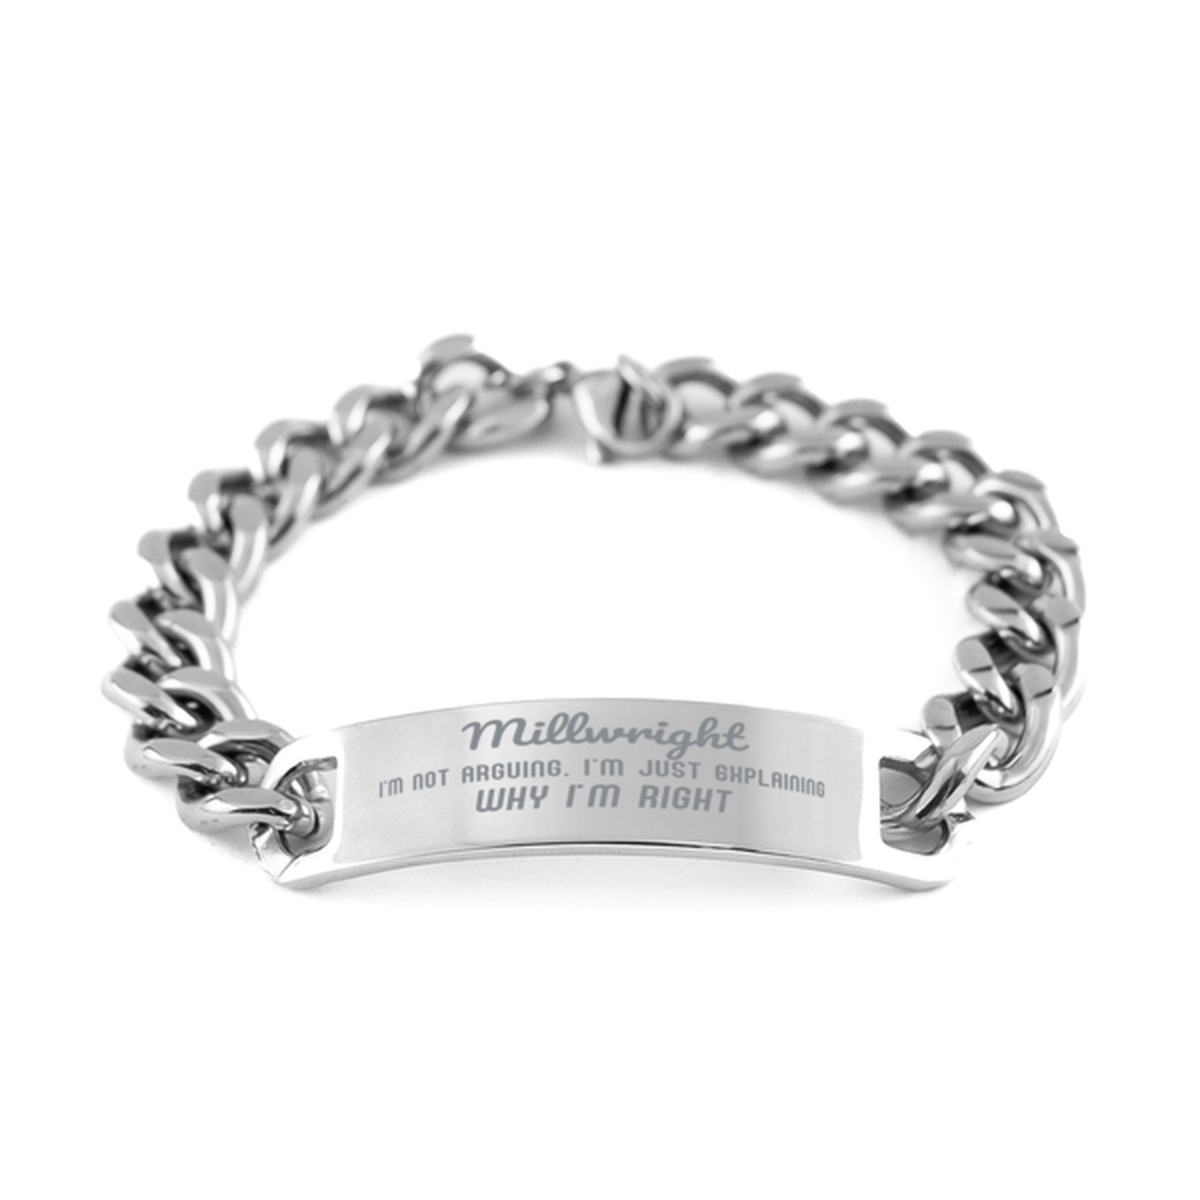 Millwright I'm not Arguing. I'm Just Explaining Why I'm RIGHT Cuban Chain Stainless Steel Bracelet, Graduation Birthday Christmas Millwright Gifts For Millwright Funny Saying Quote Present for Men Women Coworker